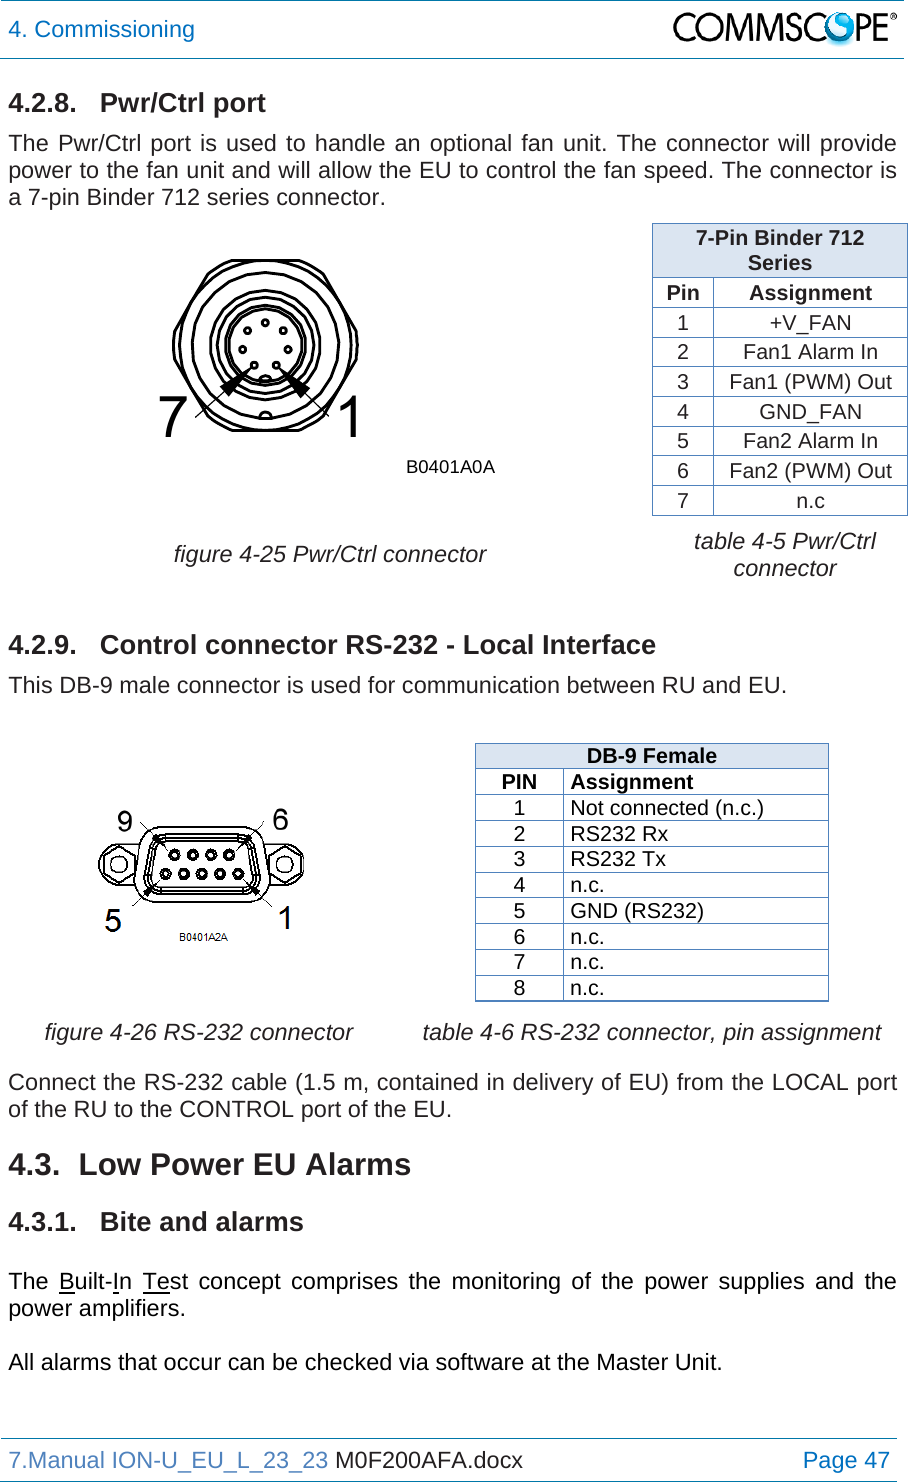 4. Commissioning  7.Manual ION-U_EU_L_23_23 M0F200AFA.docx Page 47 4.2.8. Pwr/Ctrl port The Pwr/Ctrl port is used to handle an optional fan unit. The connector will provide power to the fan unit and will allow the EU to control the fan speed. The connector is a 7-pin Binder 712 series connector.  7-Pin Binder 712 Series Pin Assignment 1 +V_FAN 2  Fan1 Alarm In 3  Fan1 (PWM) Out 4 GND_FAN 5  Fan2 Alarm In 6  Fan2 (PWM) Out 7 n.c  figure 4-25 Pwr/Ctrl connector  table 4-5 Pwr/Ctrl connector 4.2.9. Control connector RS-232 - Local Interface This DB-9 male connector is used for communication between RU and EU.    DB-9 Female PIN Assignment 1  Not connected (n.c.) 2 RS232 Rx 3 RS232 Tx 4 n.c. 5 GND (RS232) 6 n.c. 7 n.c. 8n.c.figure 4-26 RS-232 connector  table 4-6 RS-232 connector, pin assignmentConnect the RS-232 cable (1.5 m, contained in delivery of EU) from the LOCAL port of the RU to the CONTROL port of the EU. 4.3.  Low Power EU Alarms 4.3.1.  Bite and alarms  The Built-In Test concept comprises the monitoring of the power supplies and the power amplifiers.  All alarms that occur can be checked via software at the Master Unit.   71B0401A0A